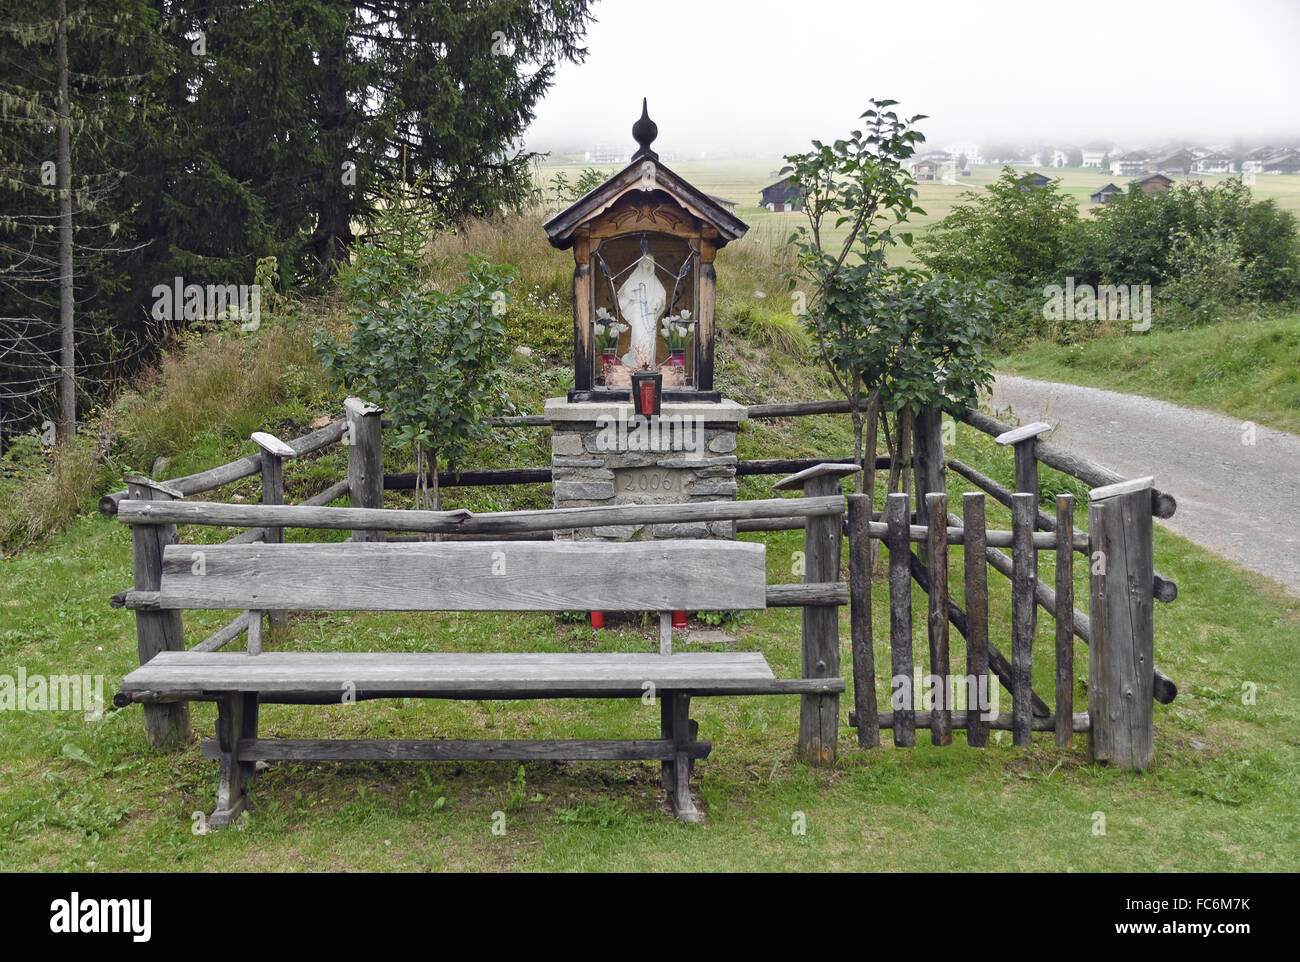 wayside shrine with wooden fence and bench Stock Photo